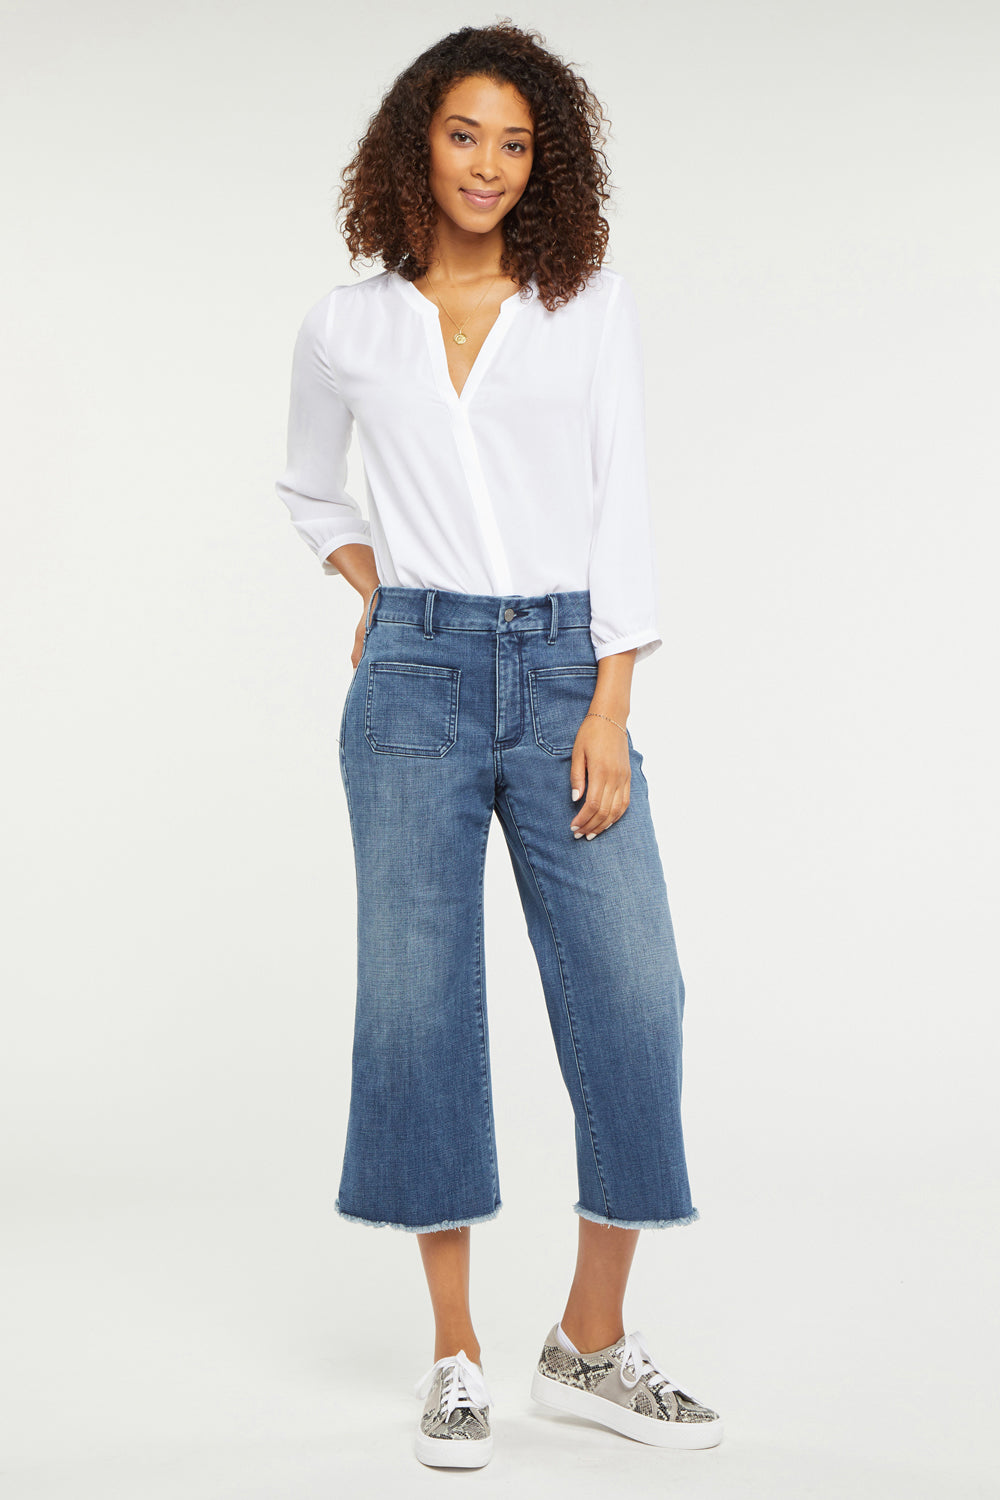 NYDJ Patchie Wide Leg Capri Jeans With Frayed Hems - Caliente